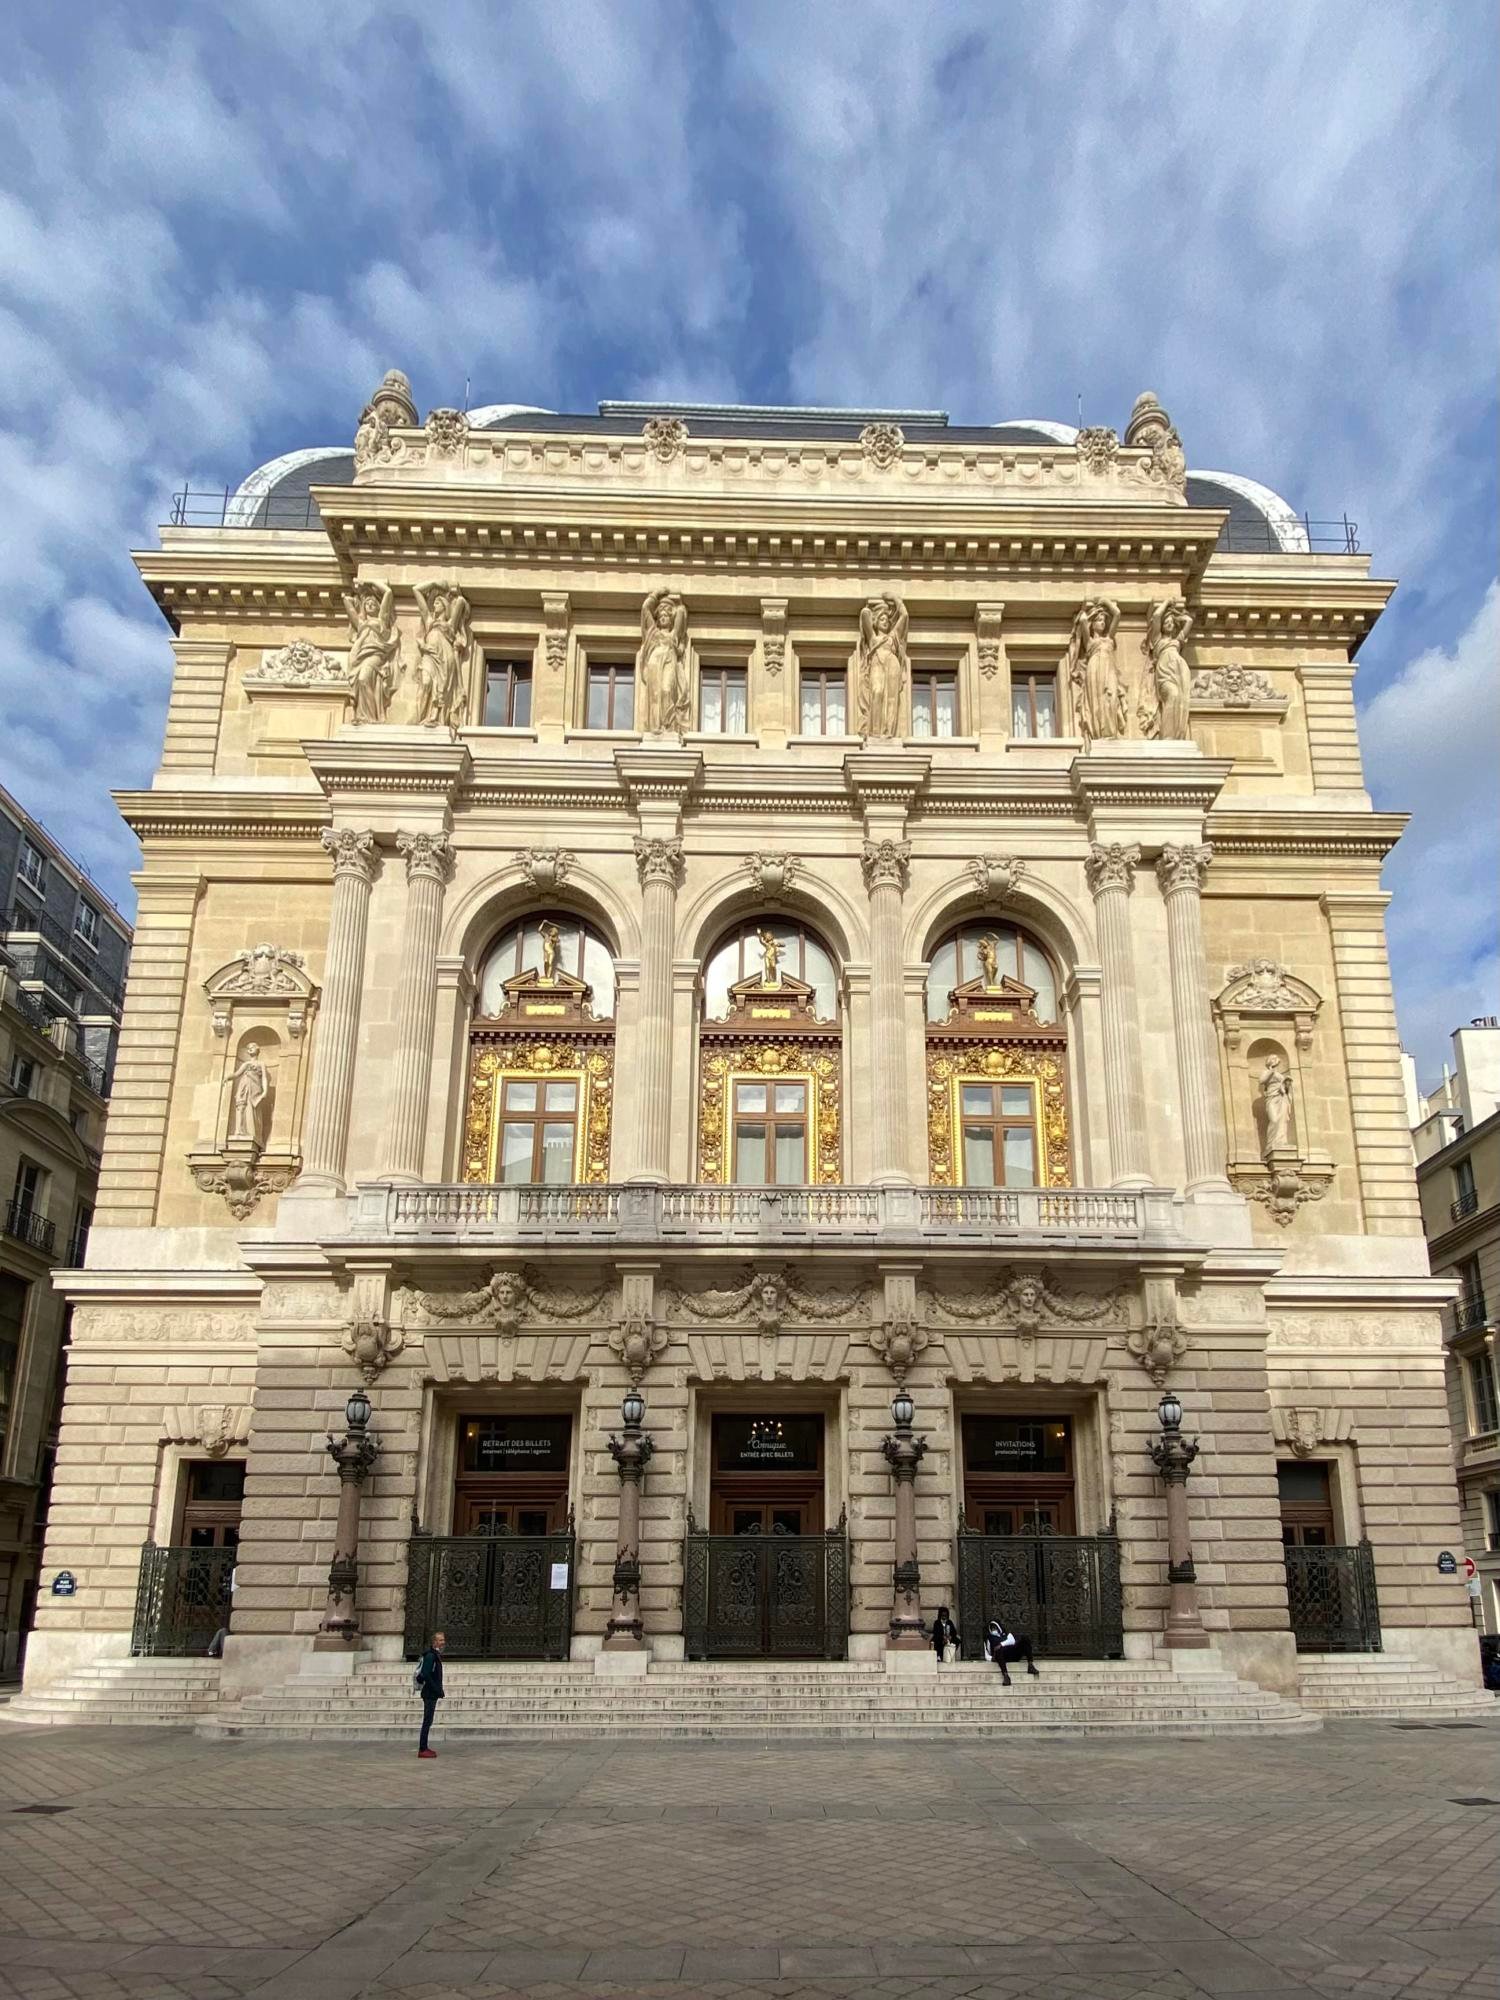 The Opera Comique is on the Boieldieu place, behind Hotel Gramont Paris